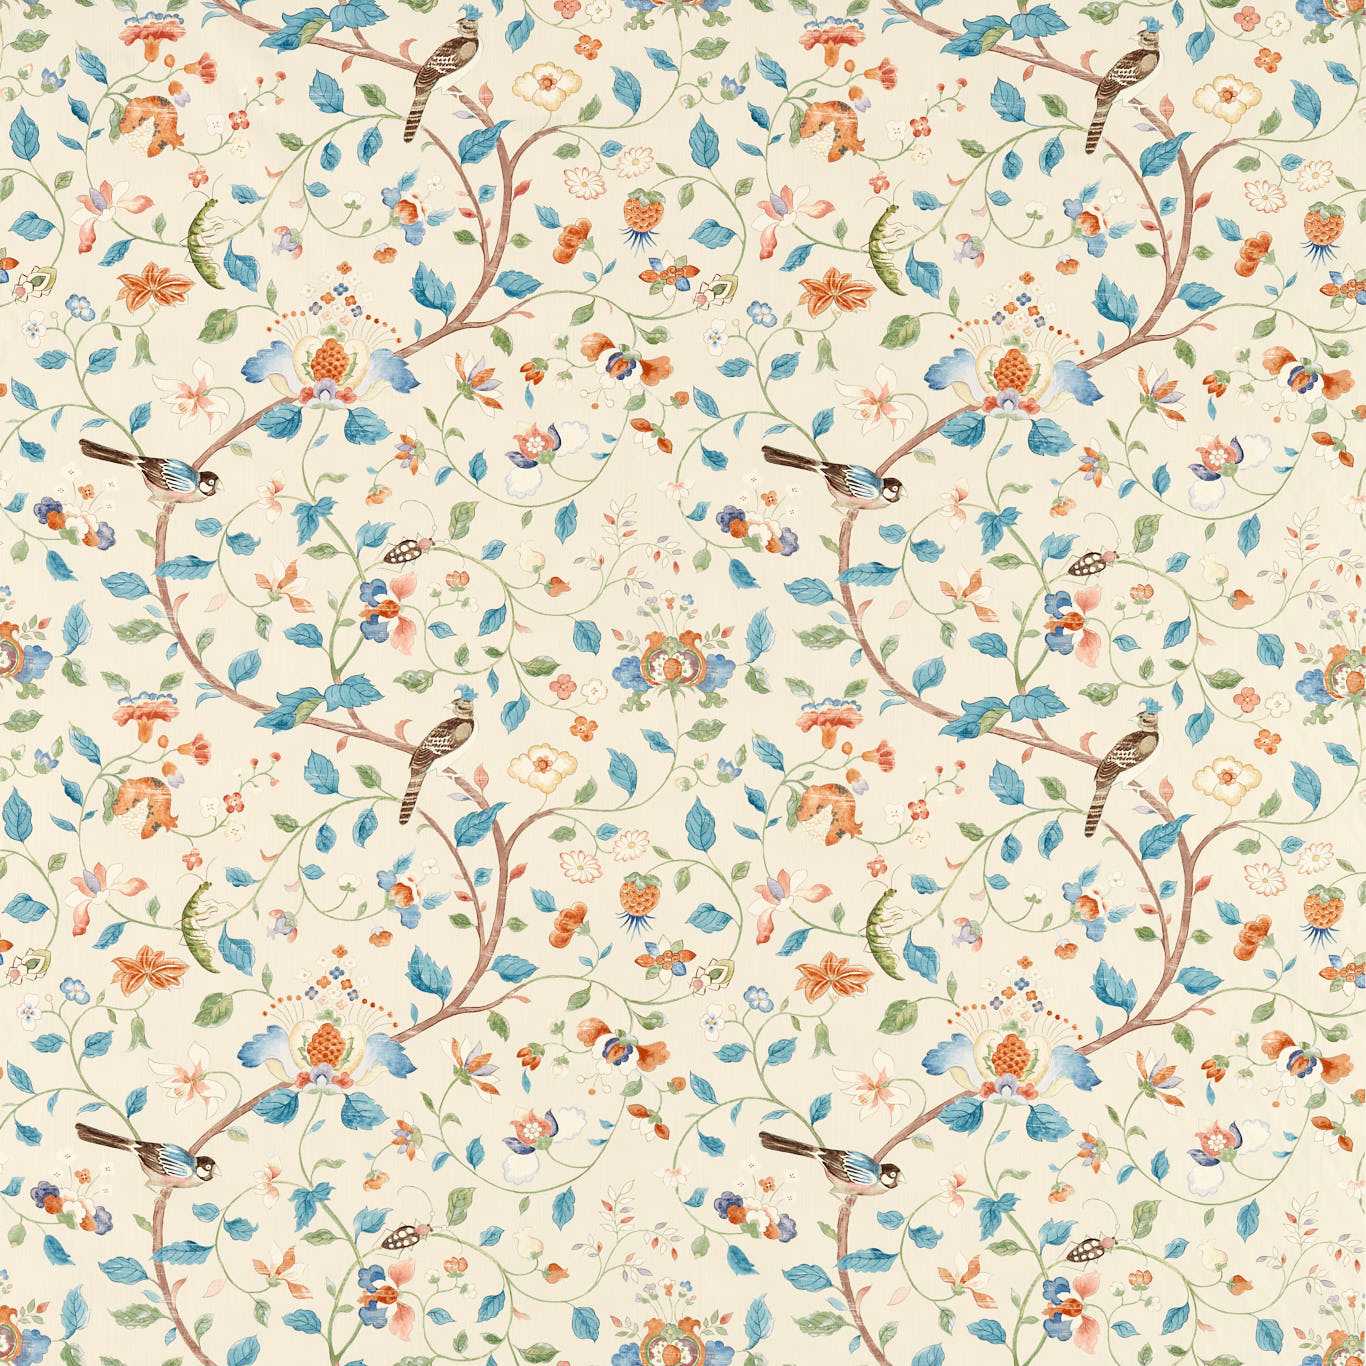 Aril's Garden Teal/Russet Fabric by SAN